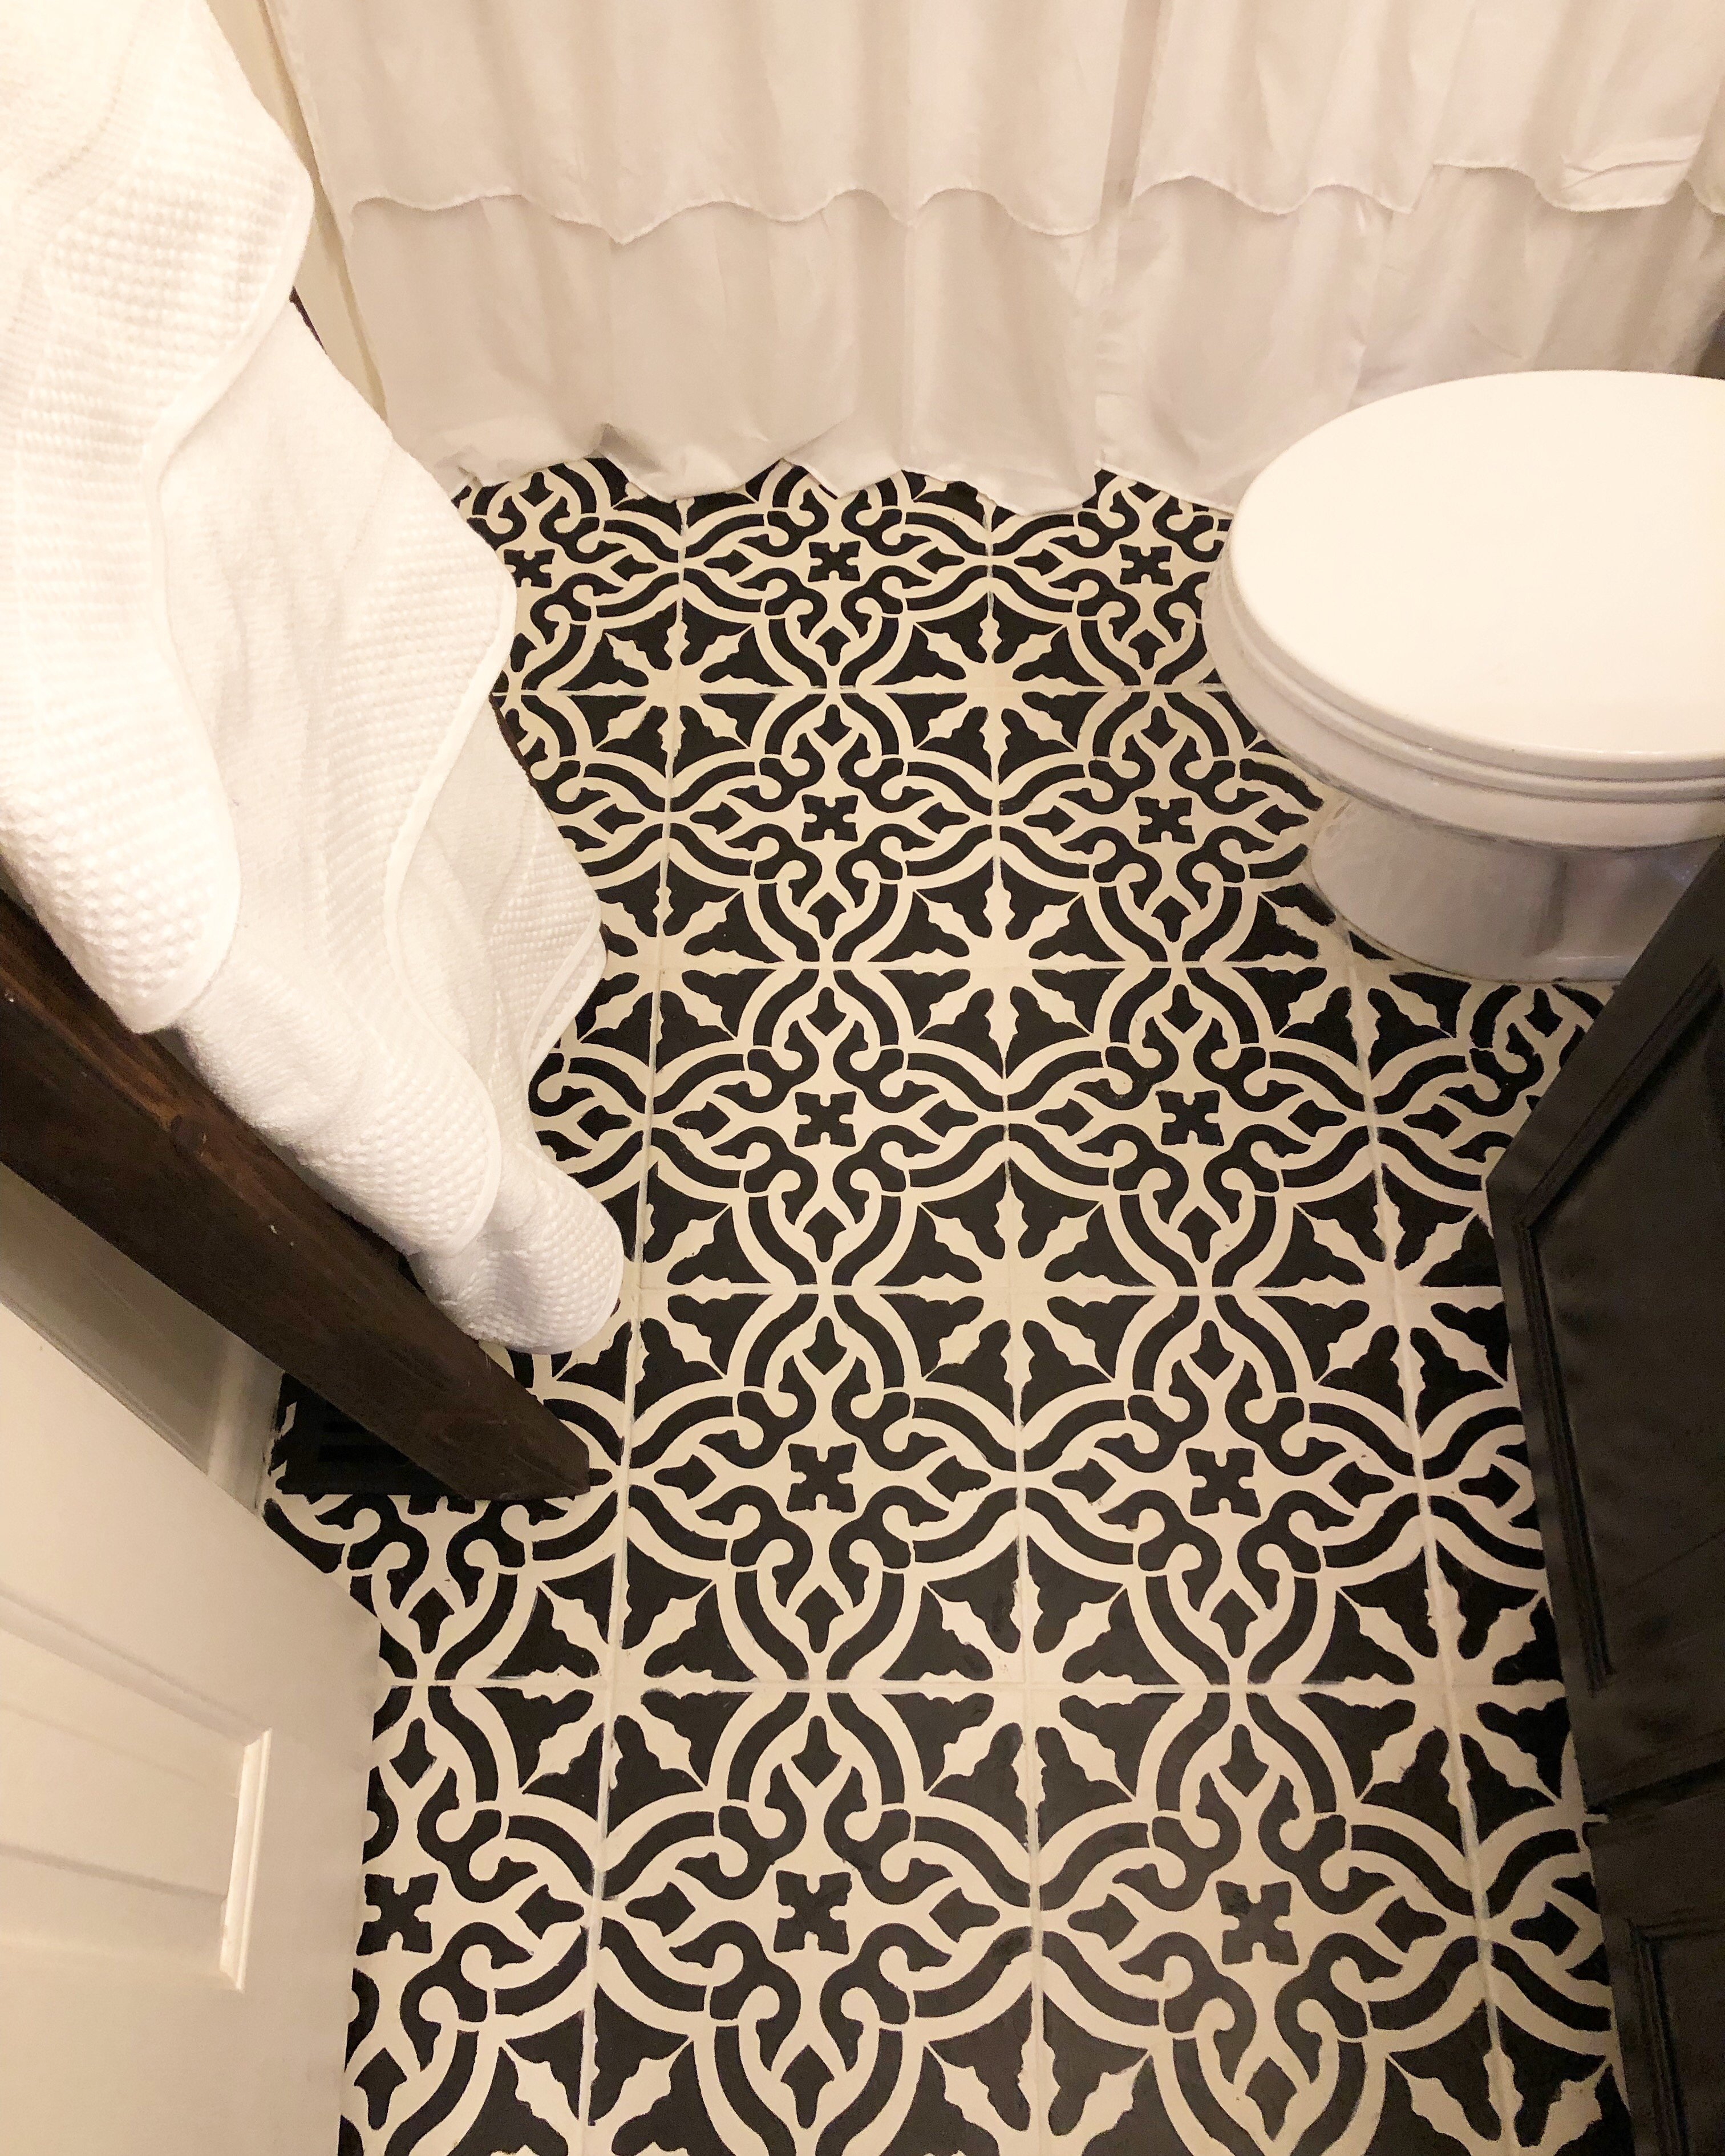 How to stencil your tile floors for a beautiful and cheap DIY! A step by step tutorial!